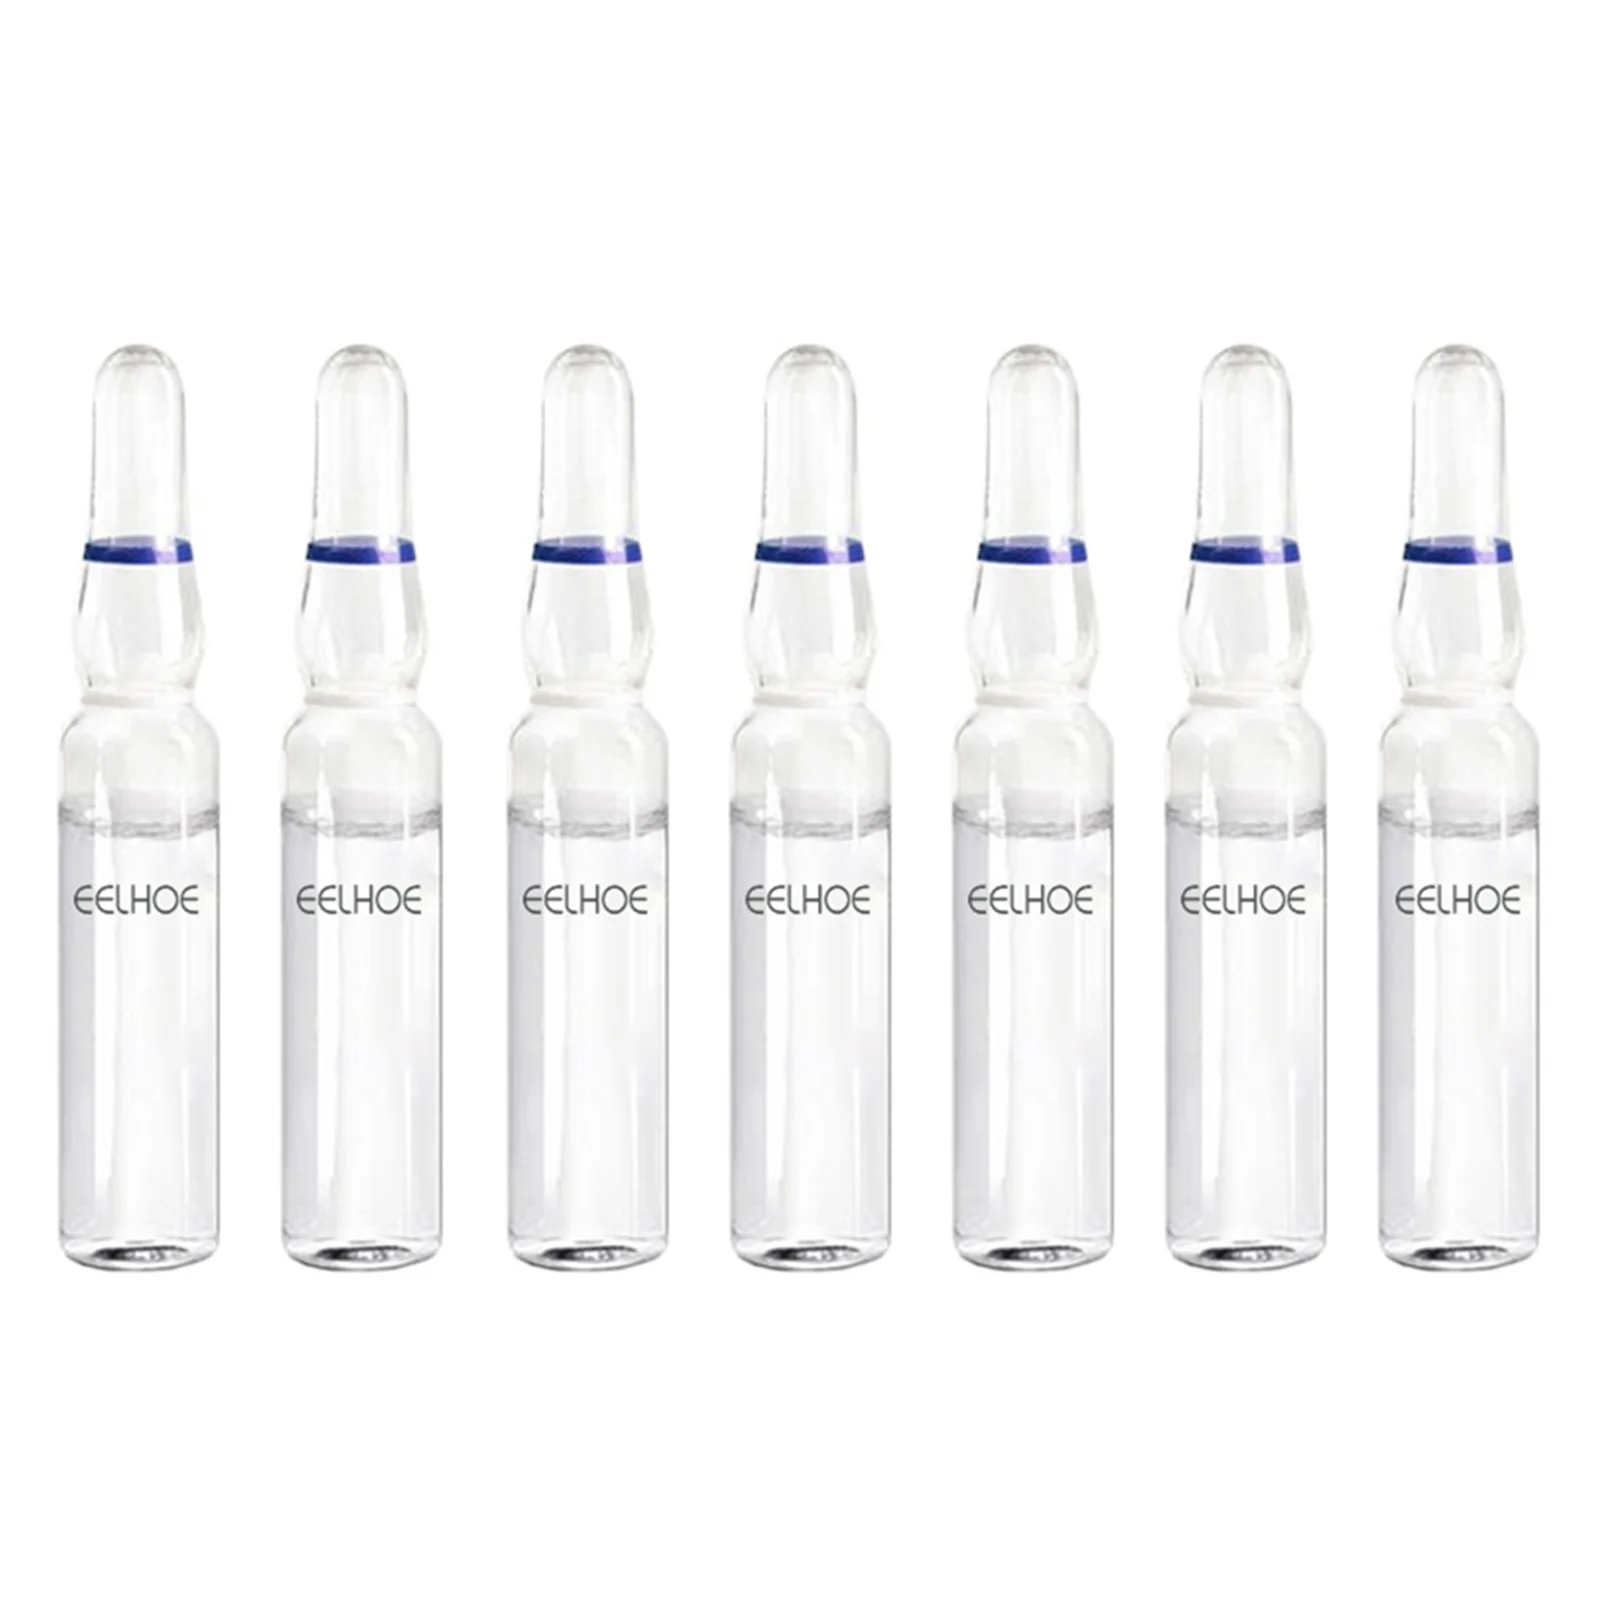 

Collagen Ampoule Serums Collagen Concentrate Ampoule Serums Collagen Facial Serums For Lines And Wrinkles Serums For Face And